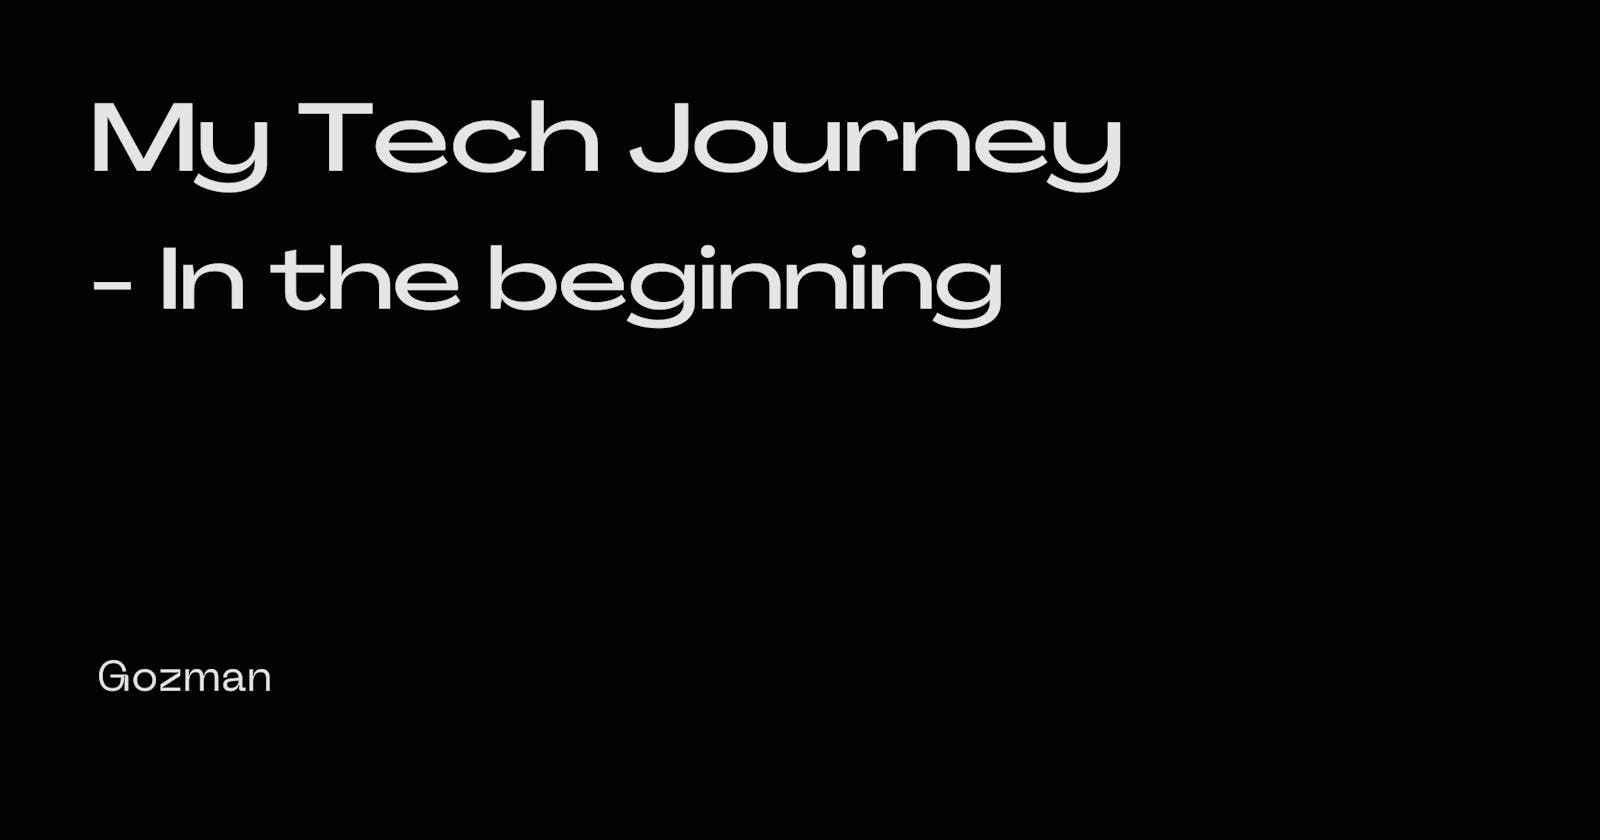 My Tech Journey - In the beginning